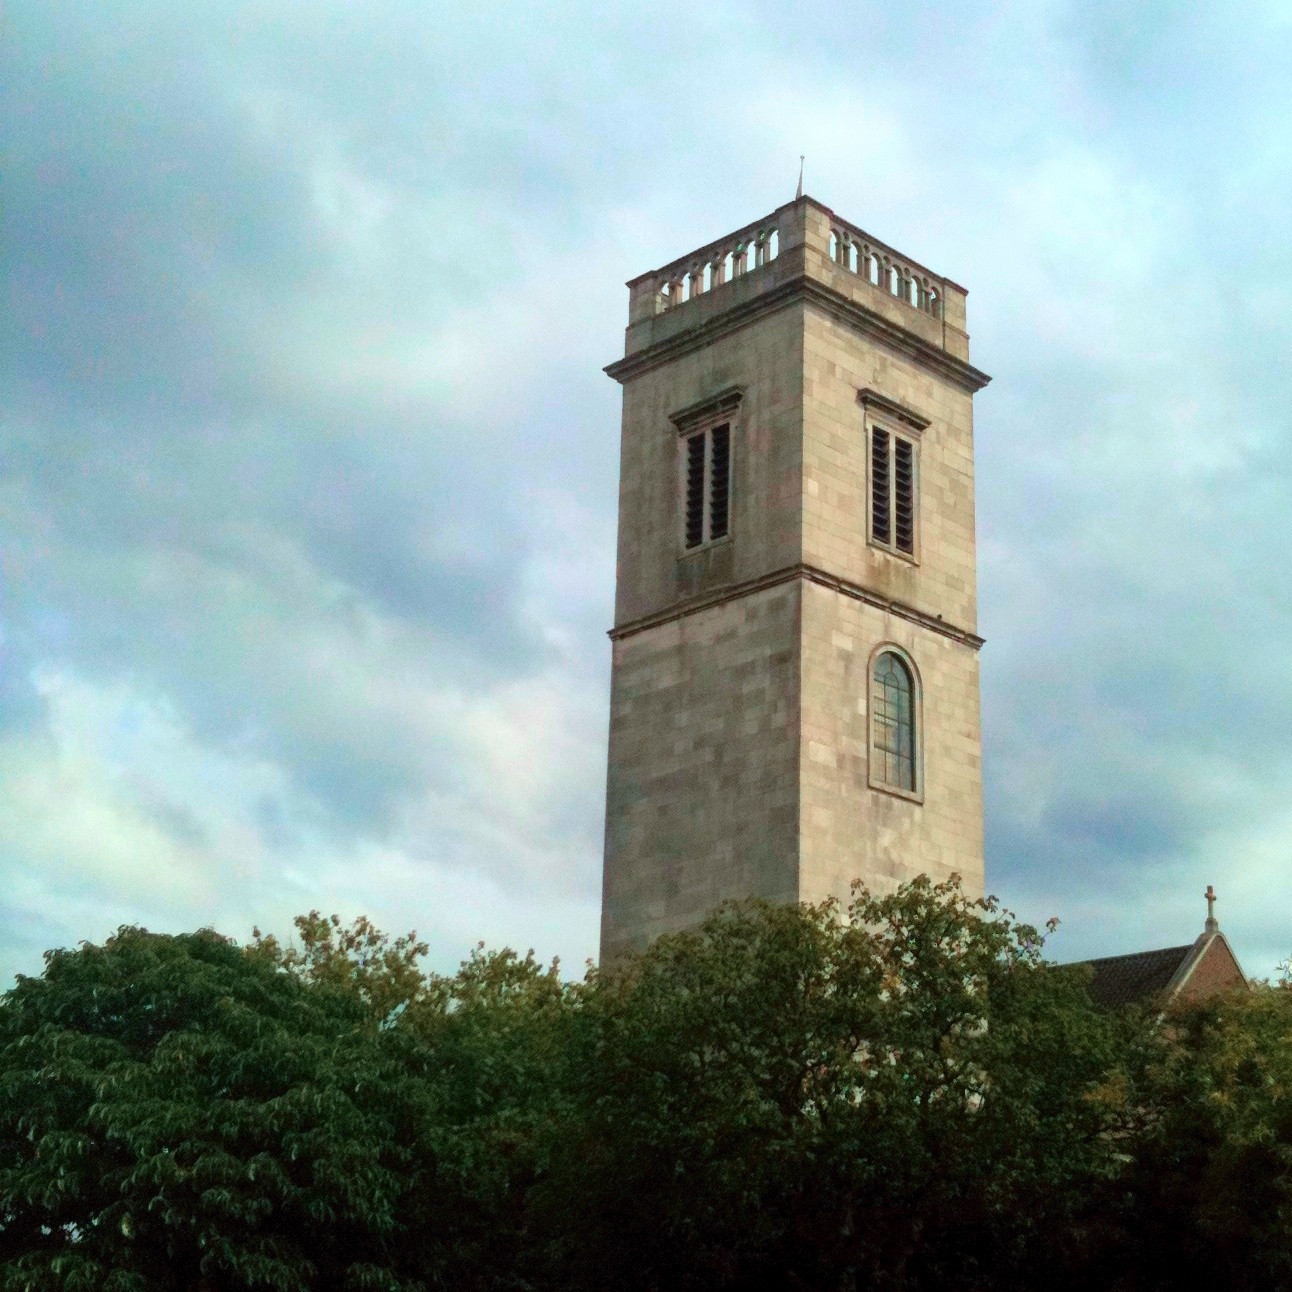 a white stone clock tower towering above trees